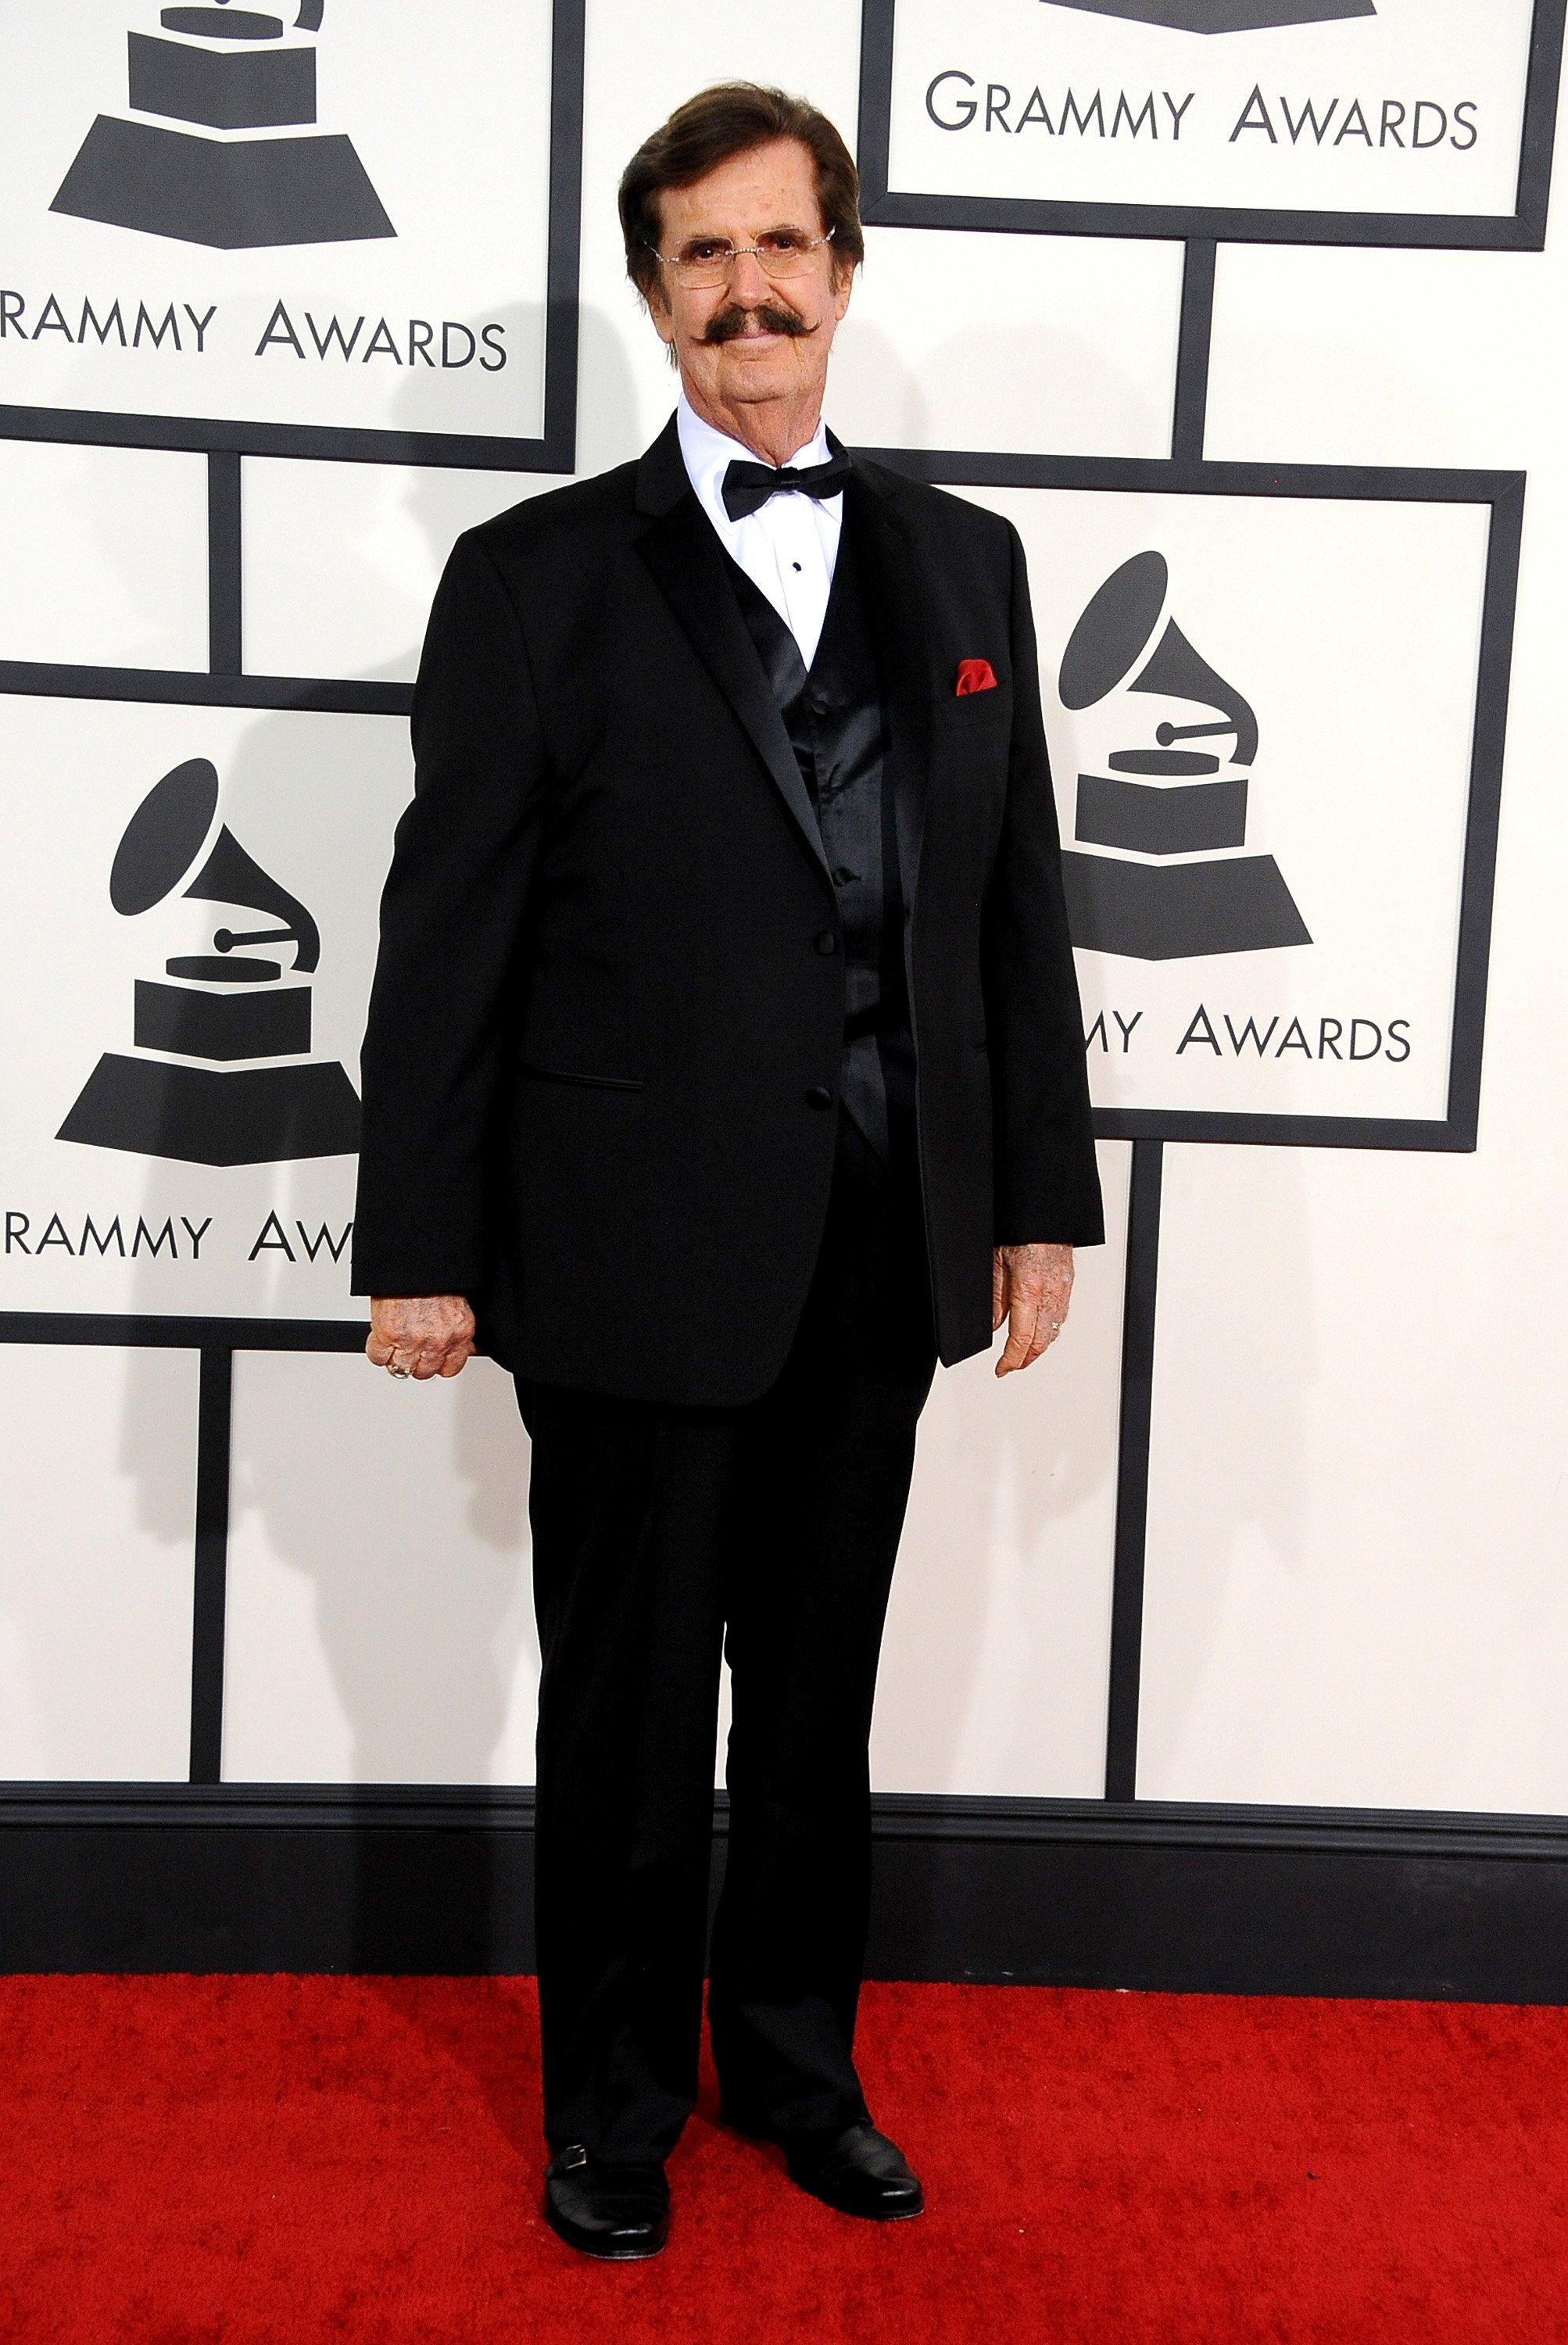 Rick Hall at the 56th GRAMMY Awards in 2014